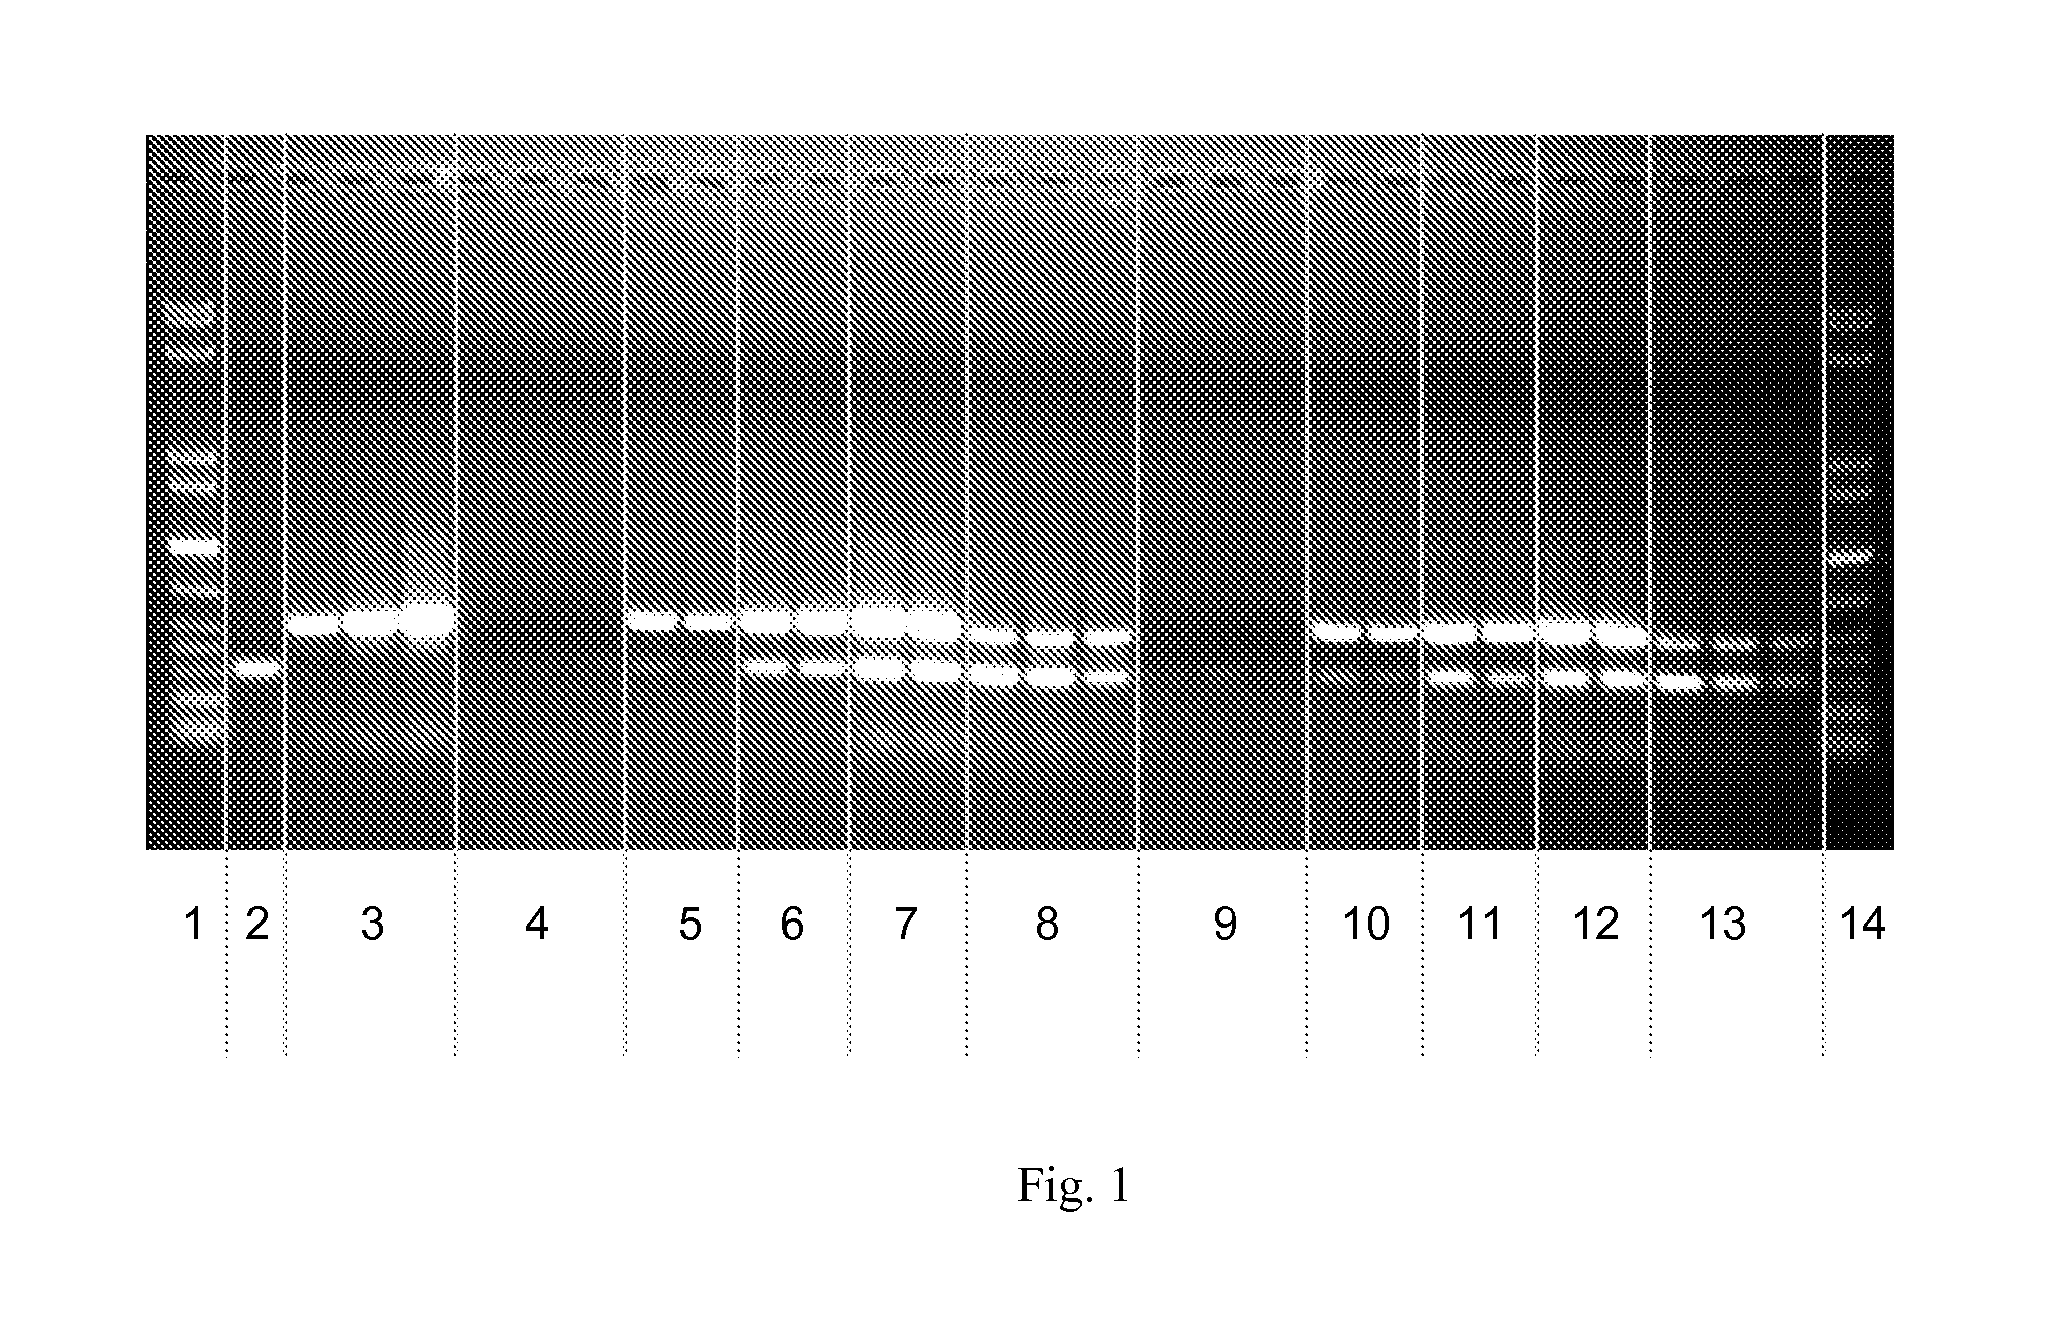 Compositions, methods, and kits for isolating and analyzing nucleic acids using an anion exchange material